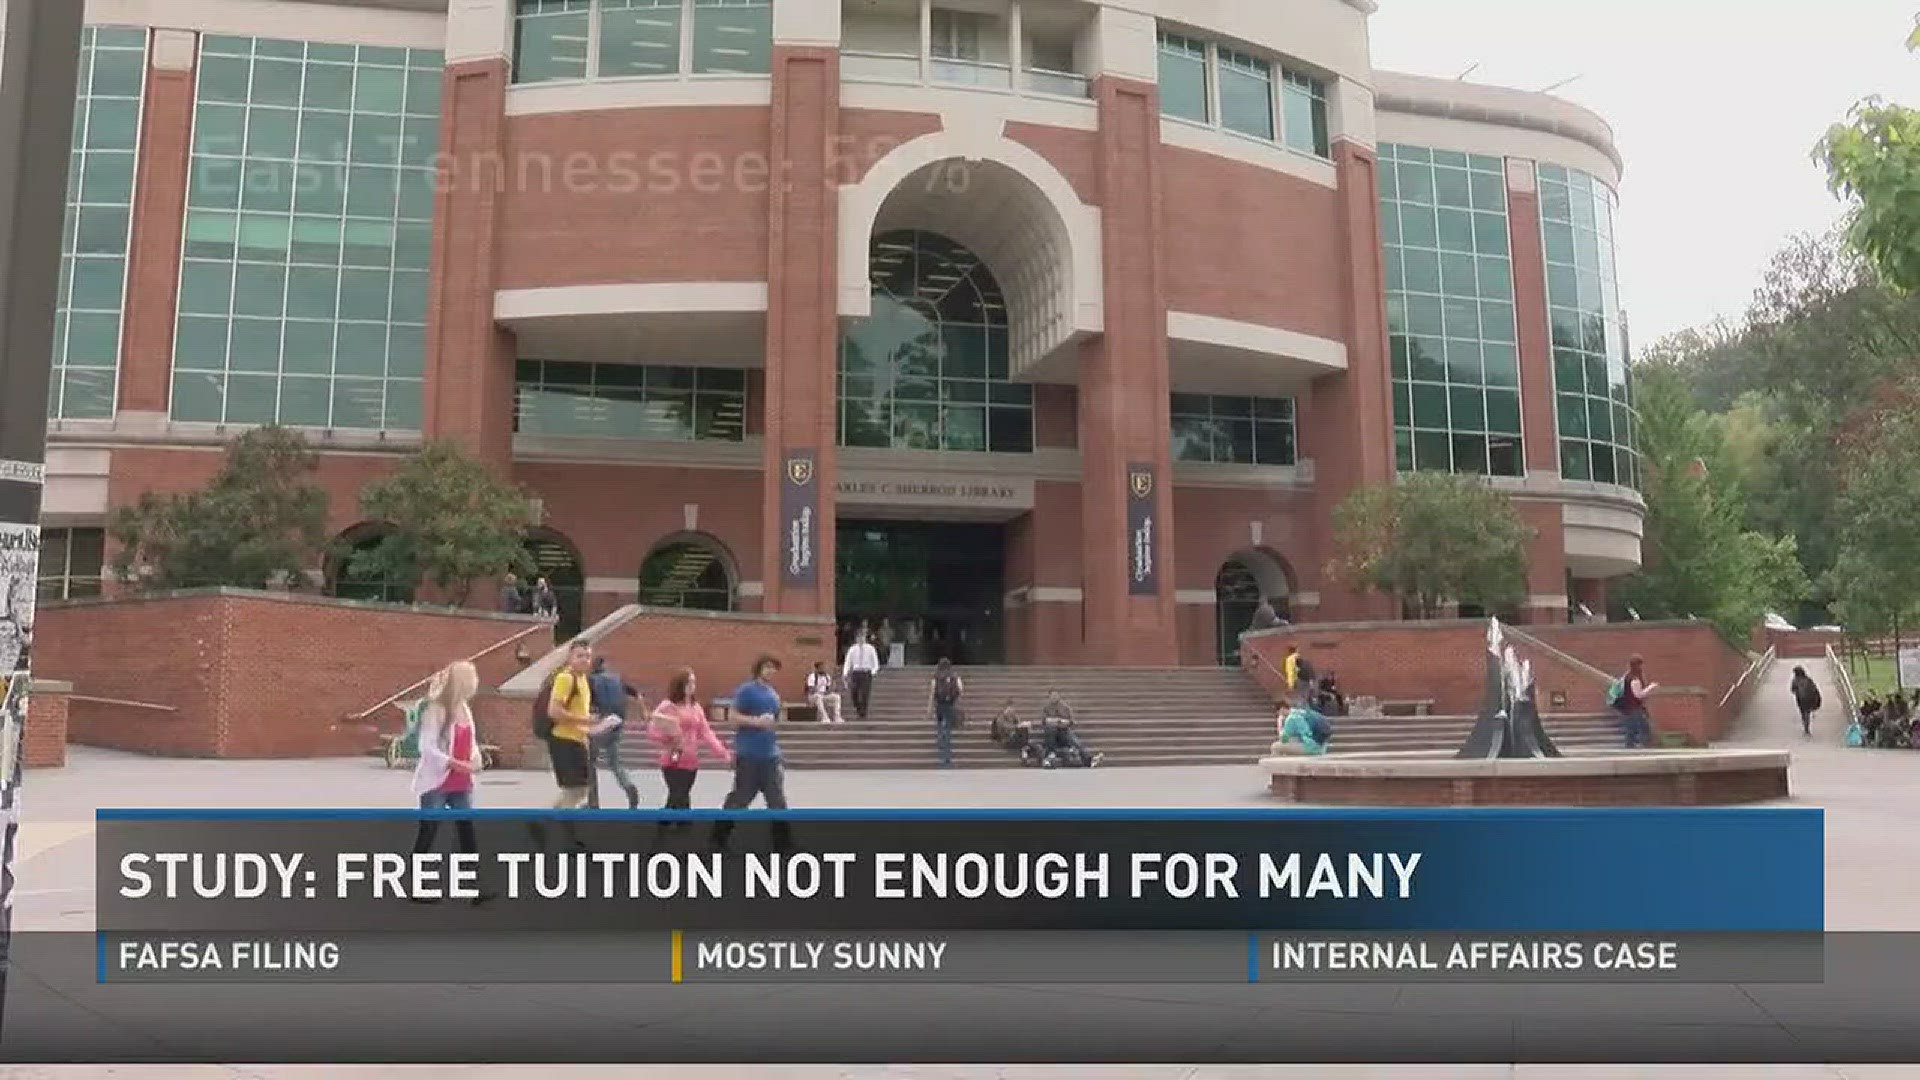 June 20, 2017: Tennessee is set to become the first state to offer free community college to all adults, but a new report shows free tuition alone is not enough to get Tennessee students to go to college.